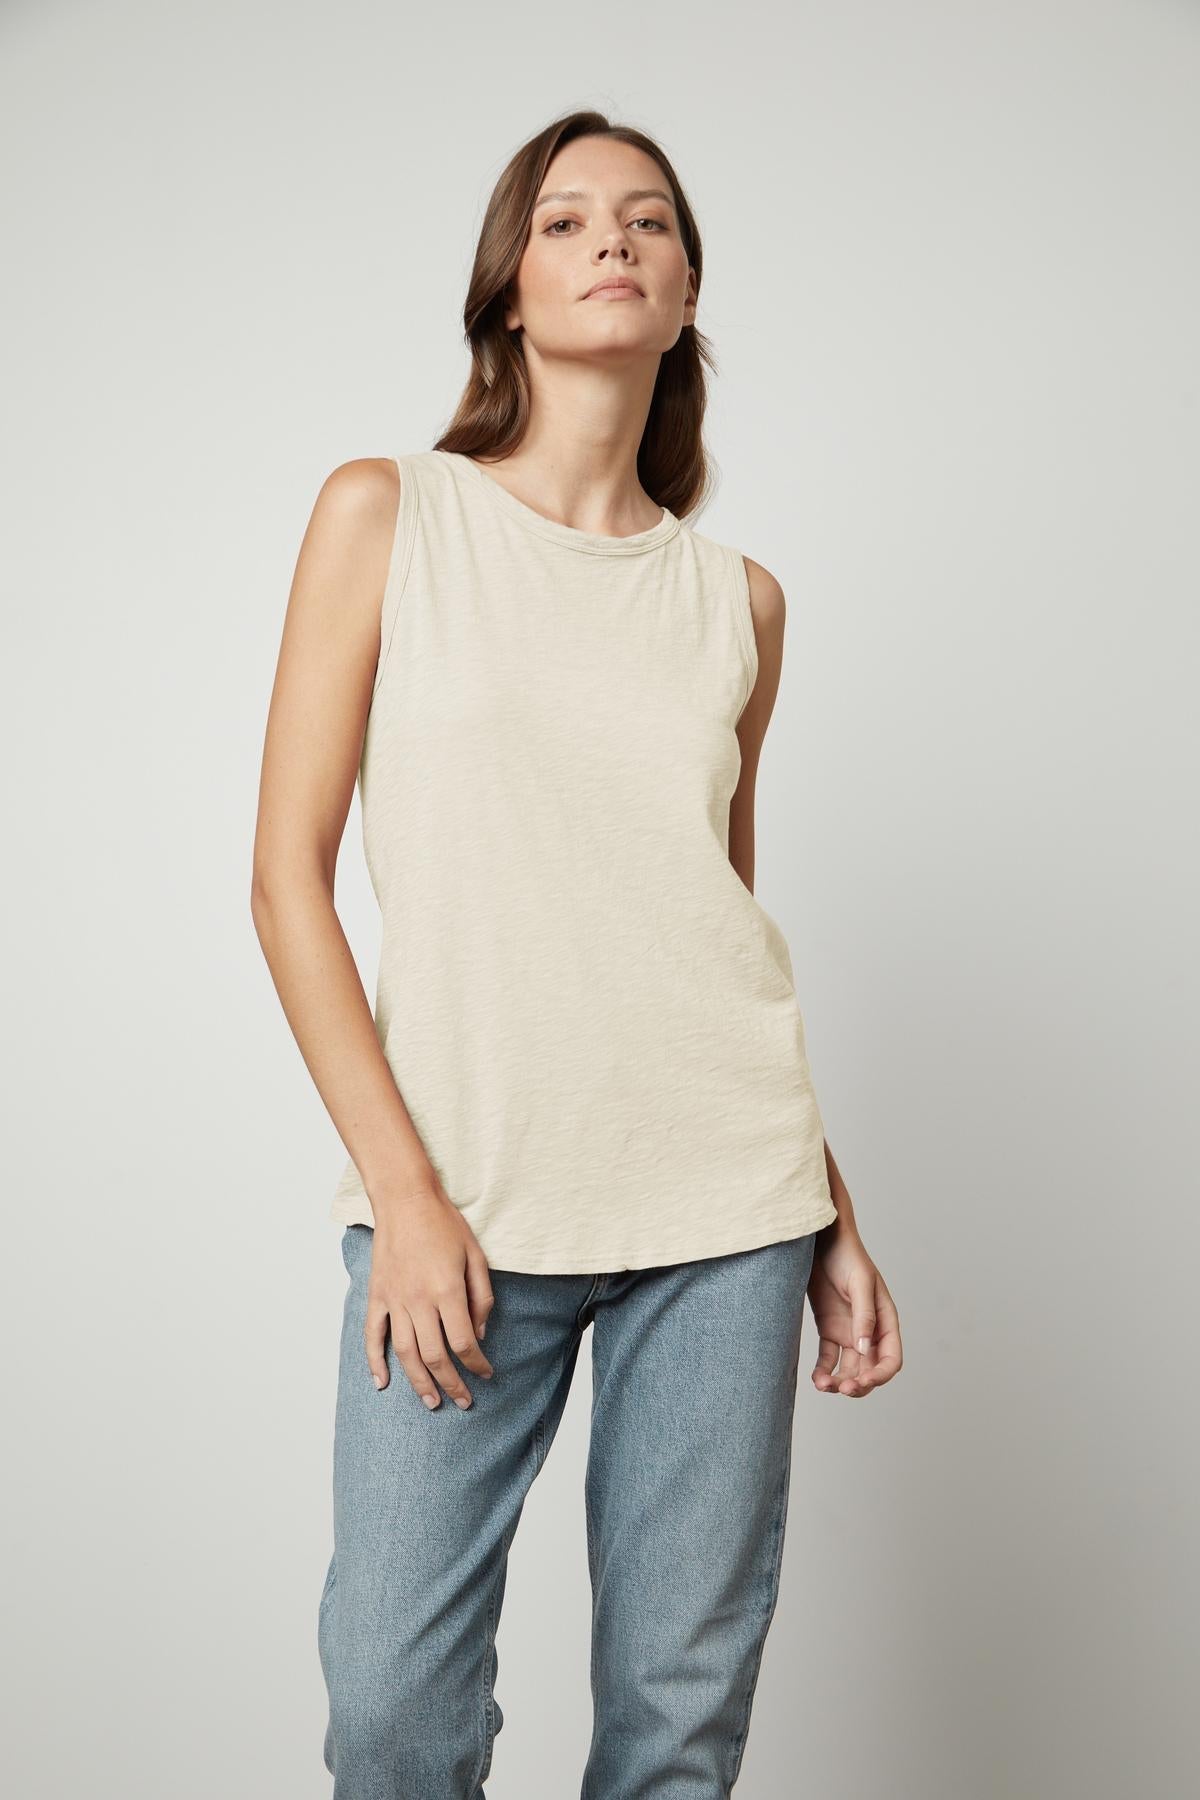 The model is wearing a TAURUS COTTON SLUB TANK by Velvet by Graham & Spencer and jeans.-35567717712065